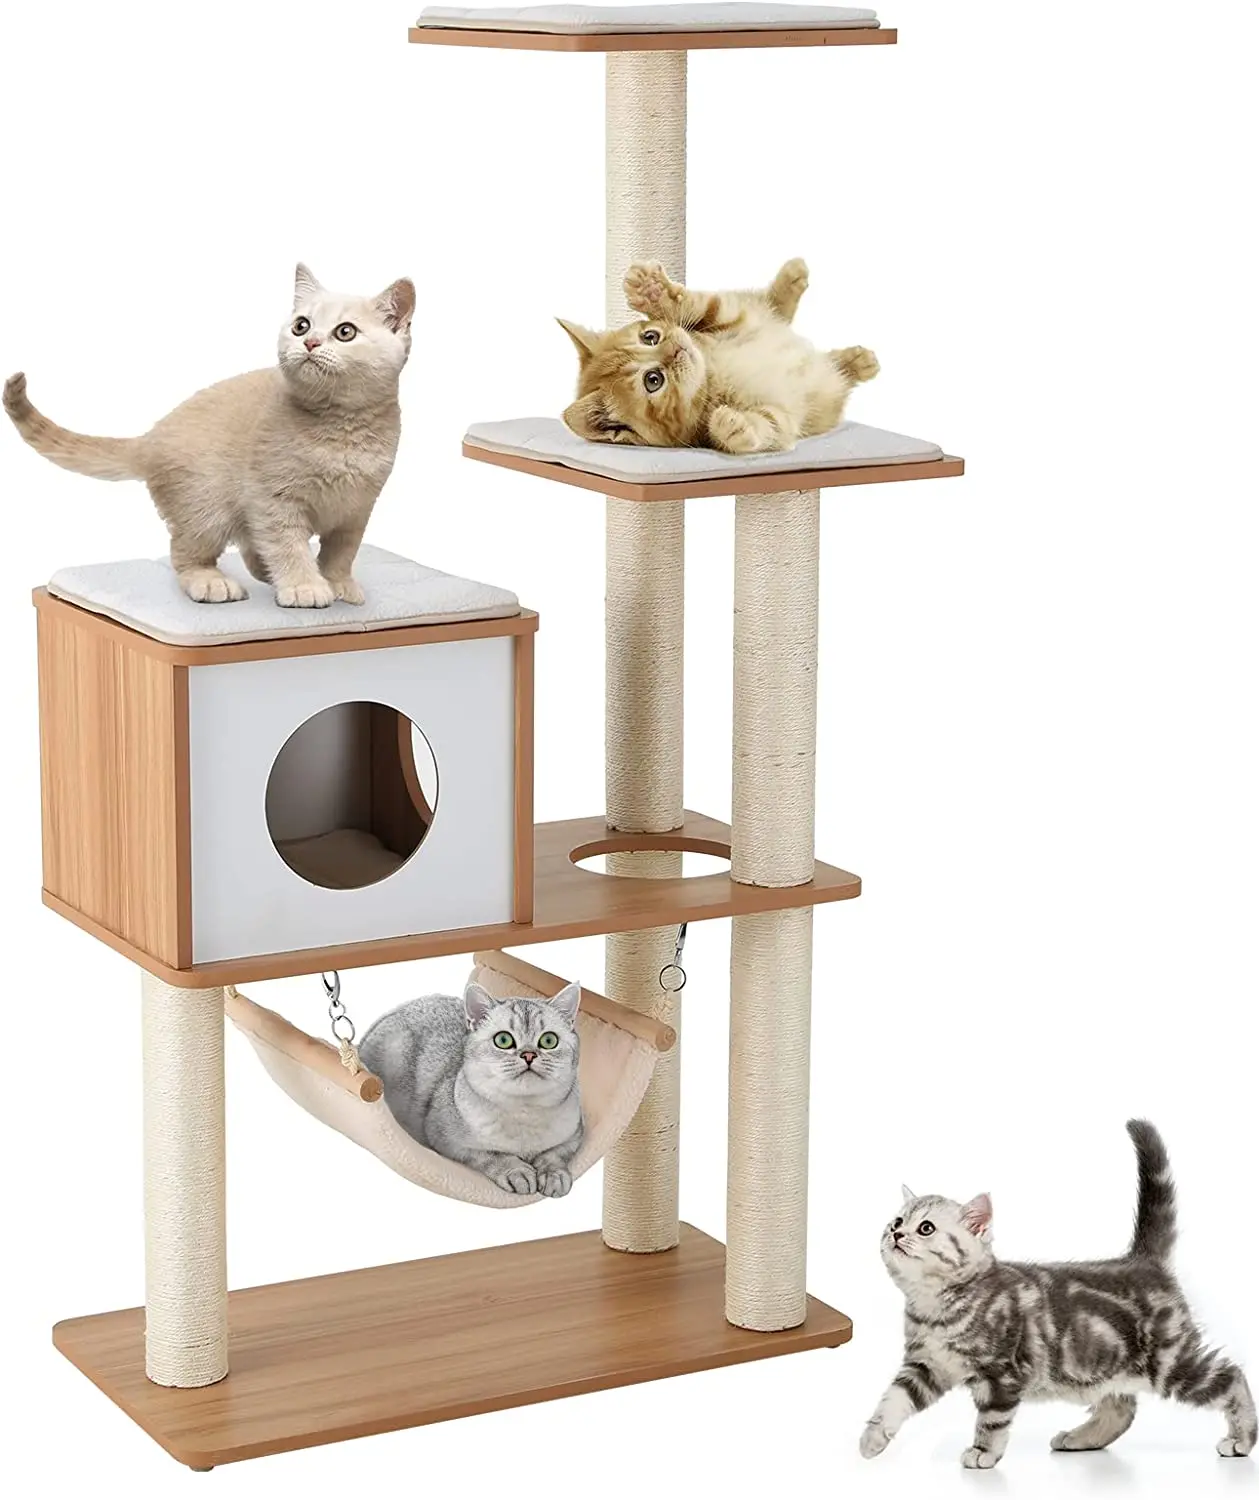 Homfa 52" Modern Cat Tree Towers for Indoor Cats, Wooden Large Cat Condo Furniture with Hammock, Cat Climbing Stand w/Full-Sisal